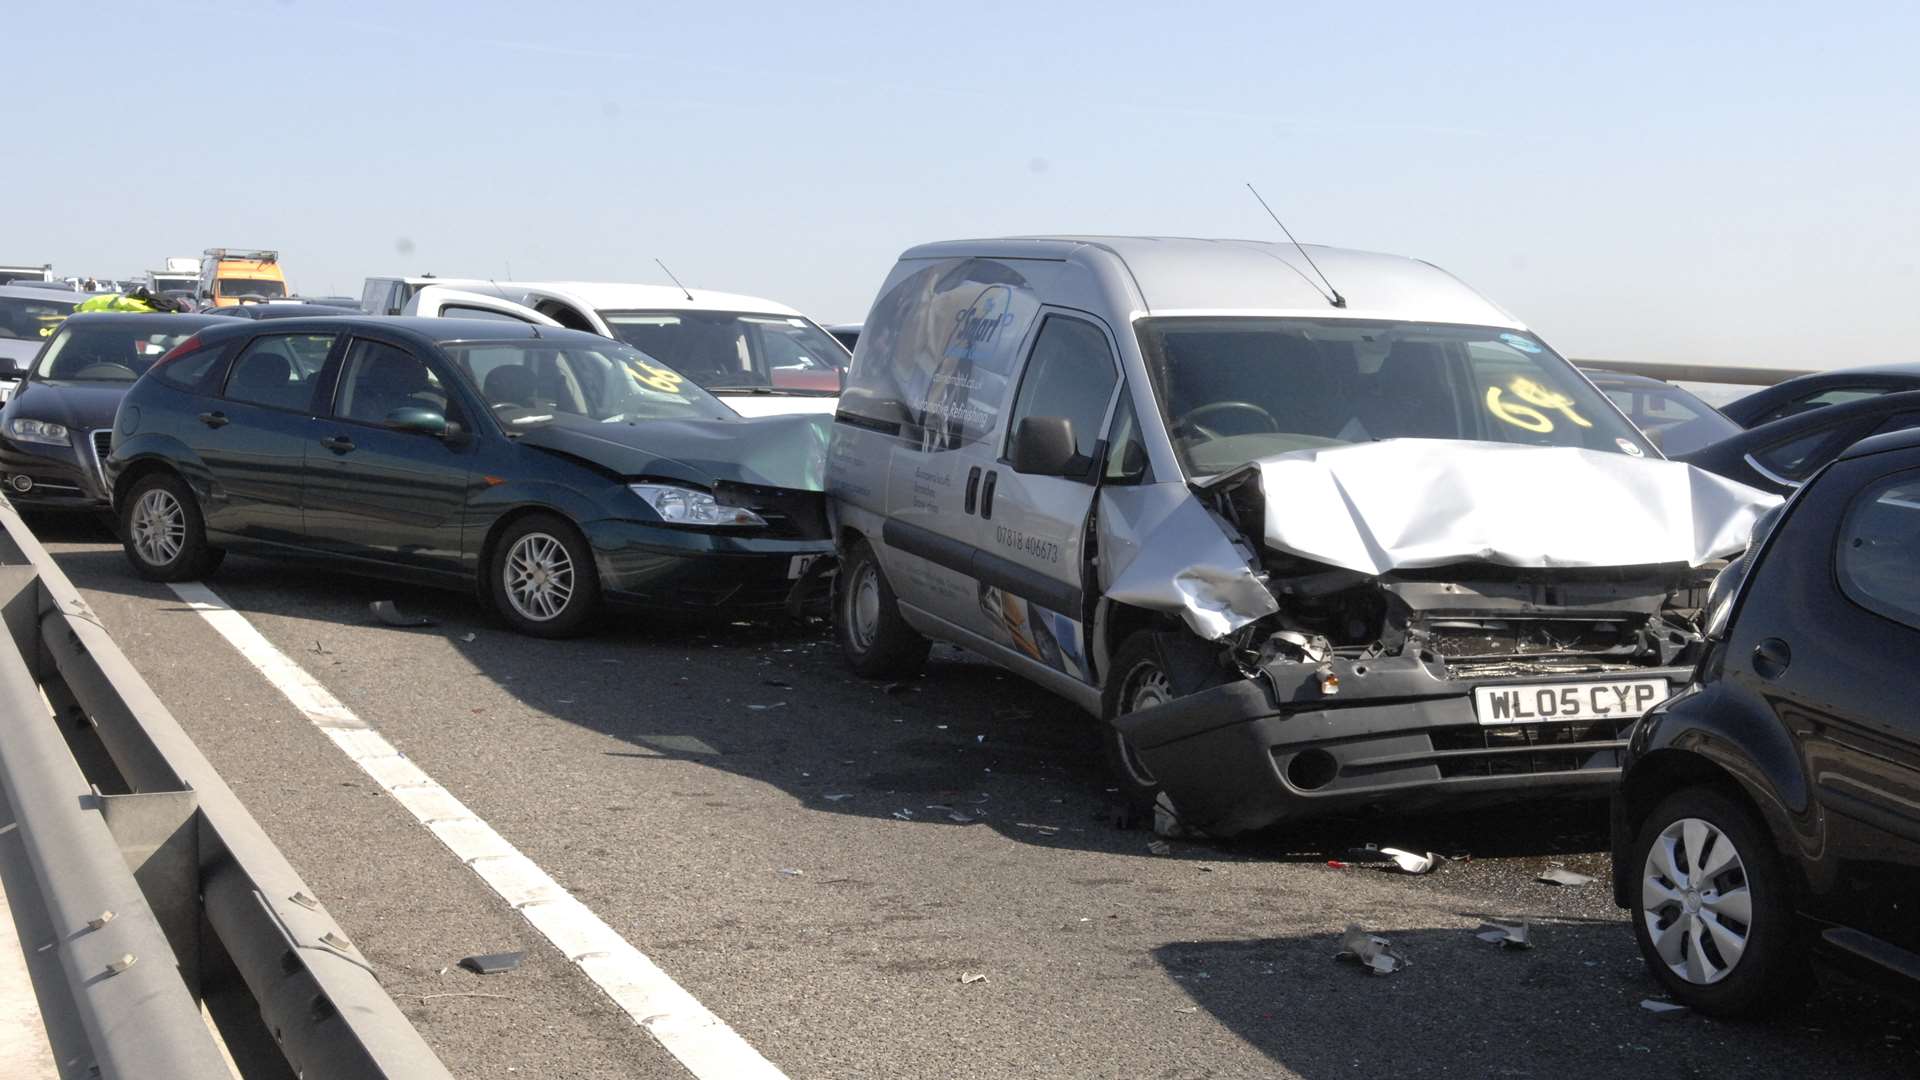 Some of the vans and cars involved in the pile-up